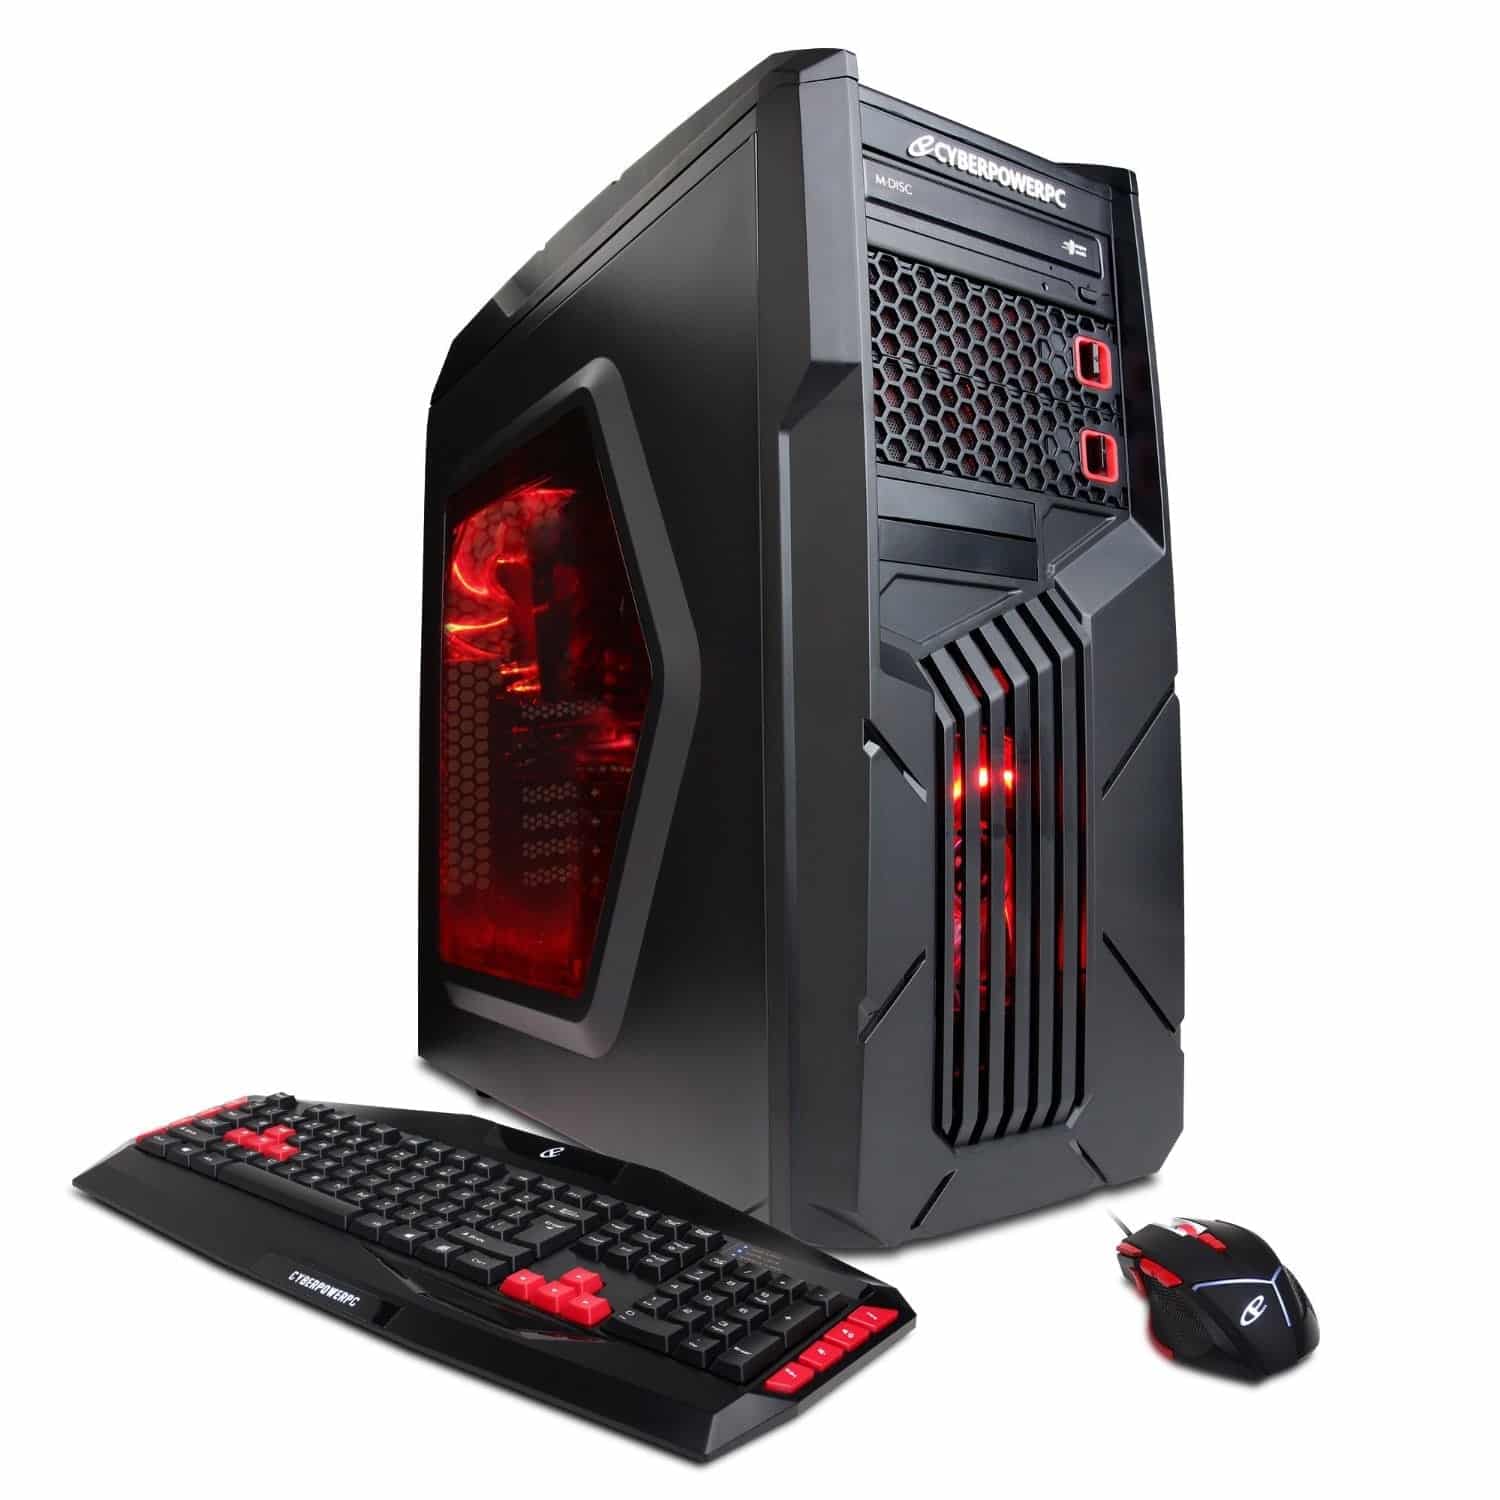 Top 5 Best Gaming Desktops to pick from in 2017 \u22c6 Android Tipster